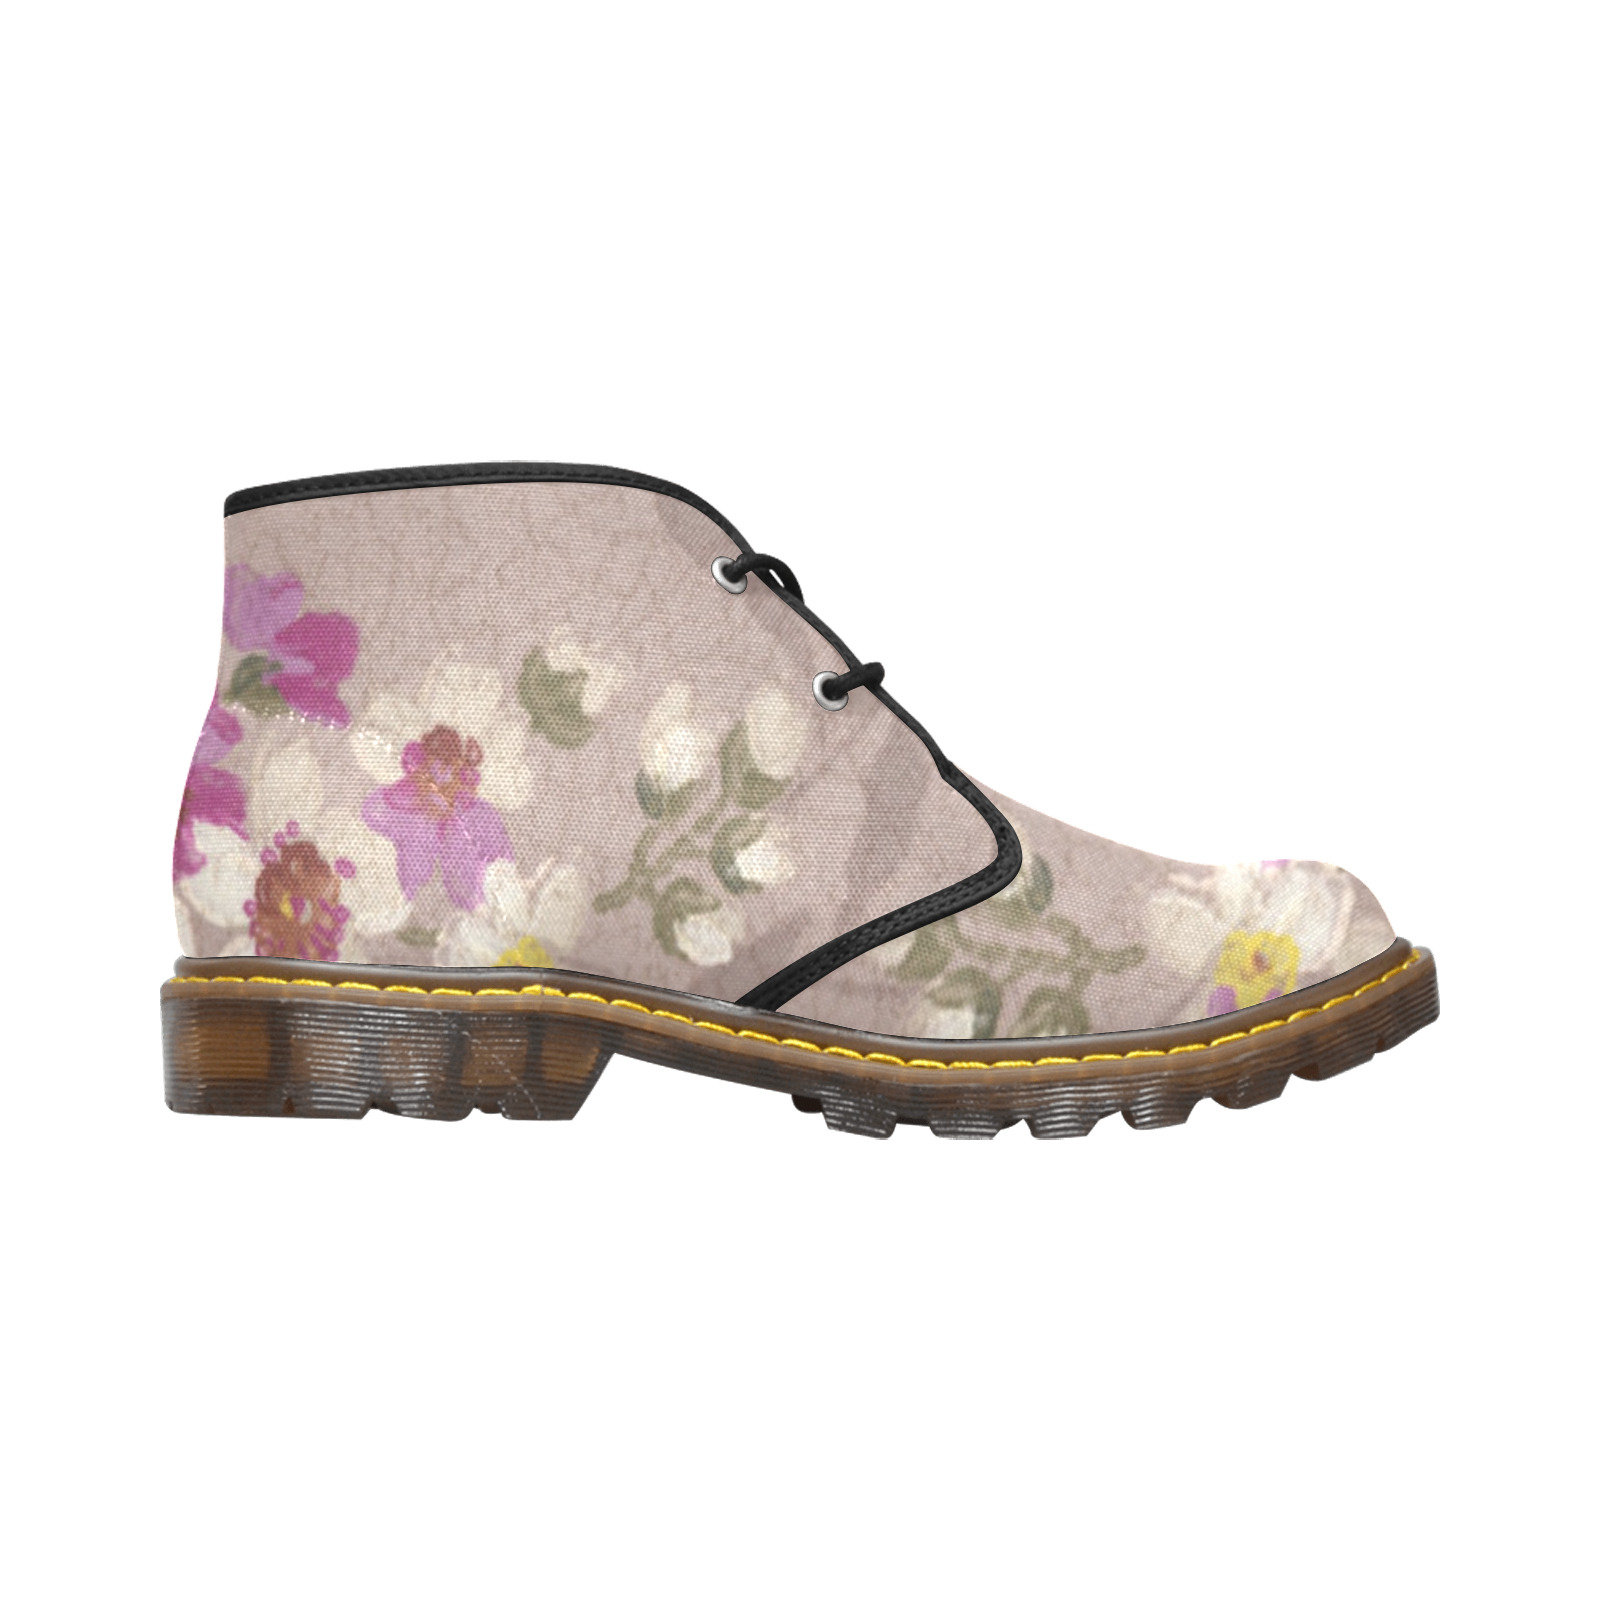 Flowers painting Women's Canvas Chukka Boots (Model 2402-1)